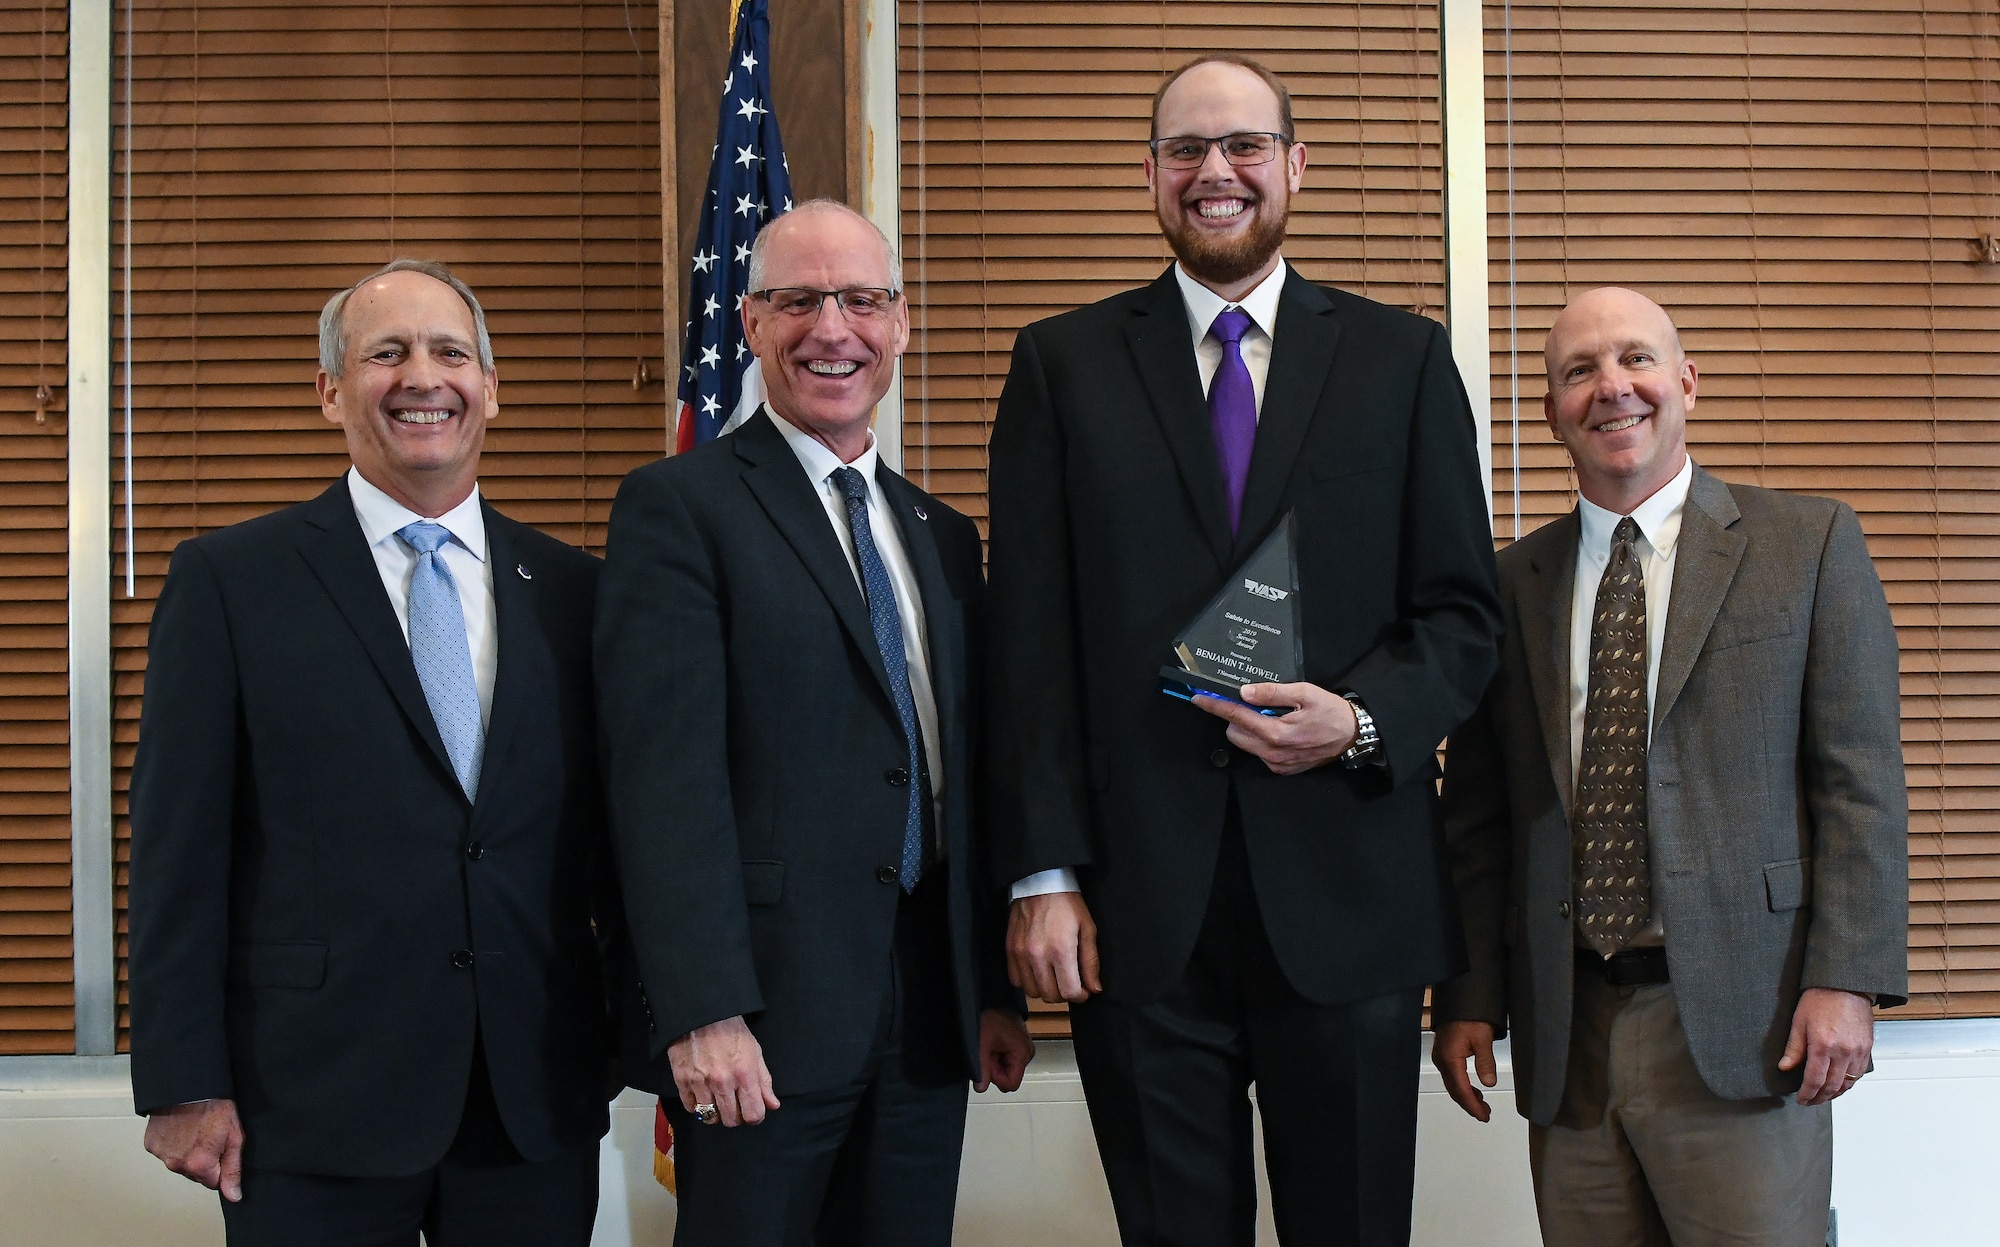 Test Operations Engineer II Benjamin Howell, third from the left, receives the Security Award during the National Aerospace Solutions (NAS), LLC, Salute to Excellence Annual Awards Banquet, Nov. 5, 2019, at the Arnold Lakeside Center, Arnold Air Force Base, Tenn. Also pictured, from left, is NAS Deputy General Manager Michael Belzil, NAS General Manager Dr. Richard Tighe and NAS Performance Assurance Director Mark Bymaster. (U.S. Air Force photo by Jill Pickett)